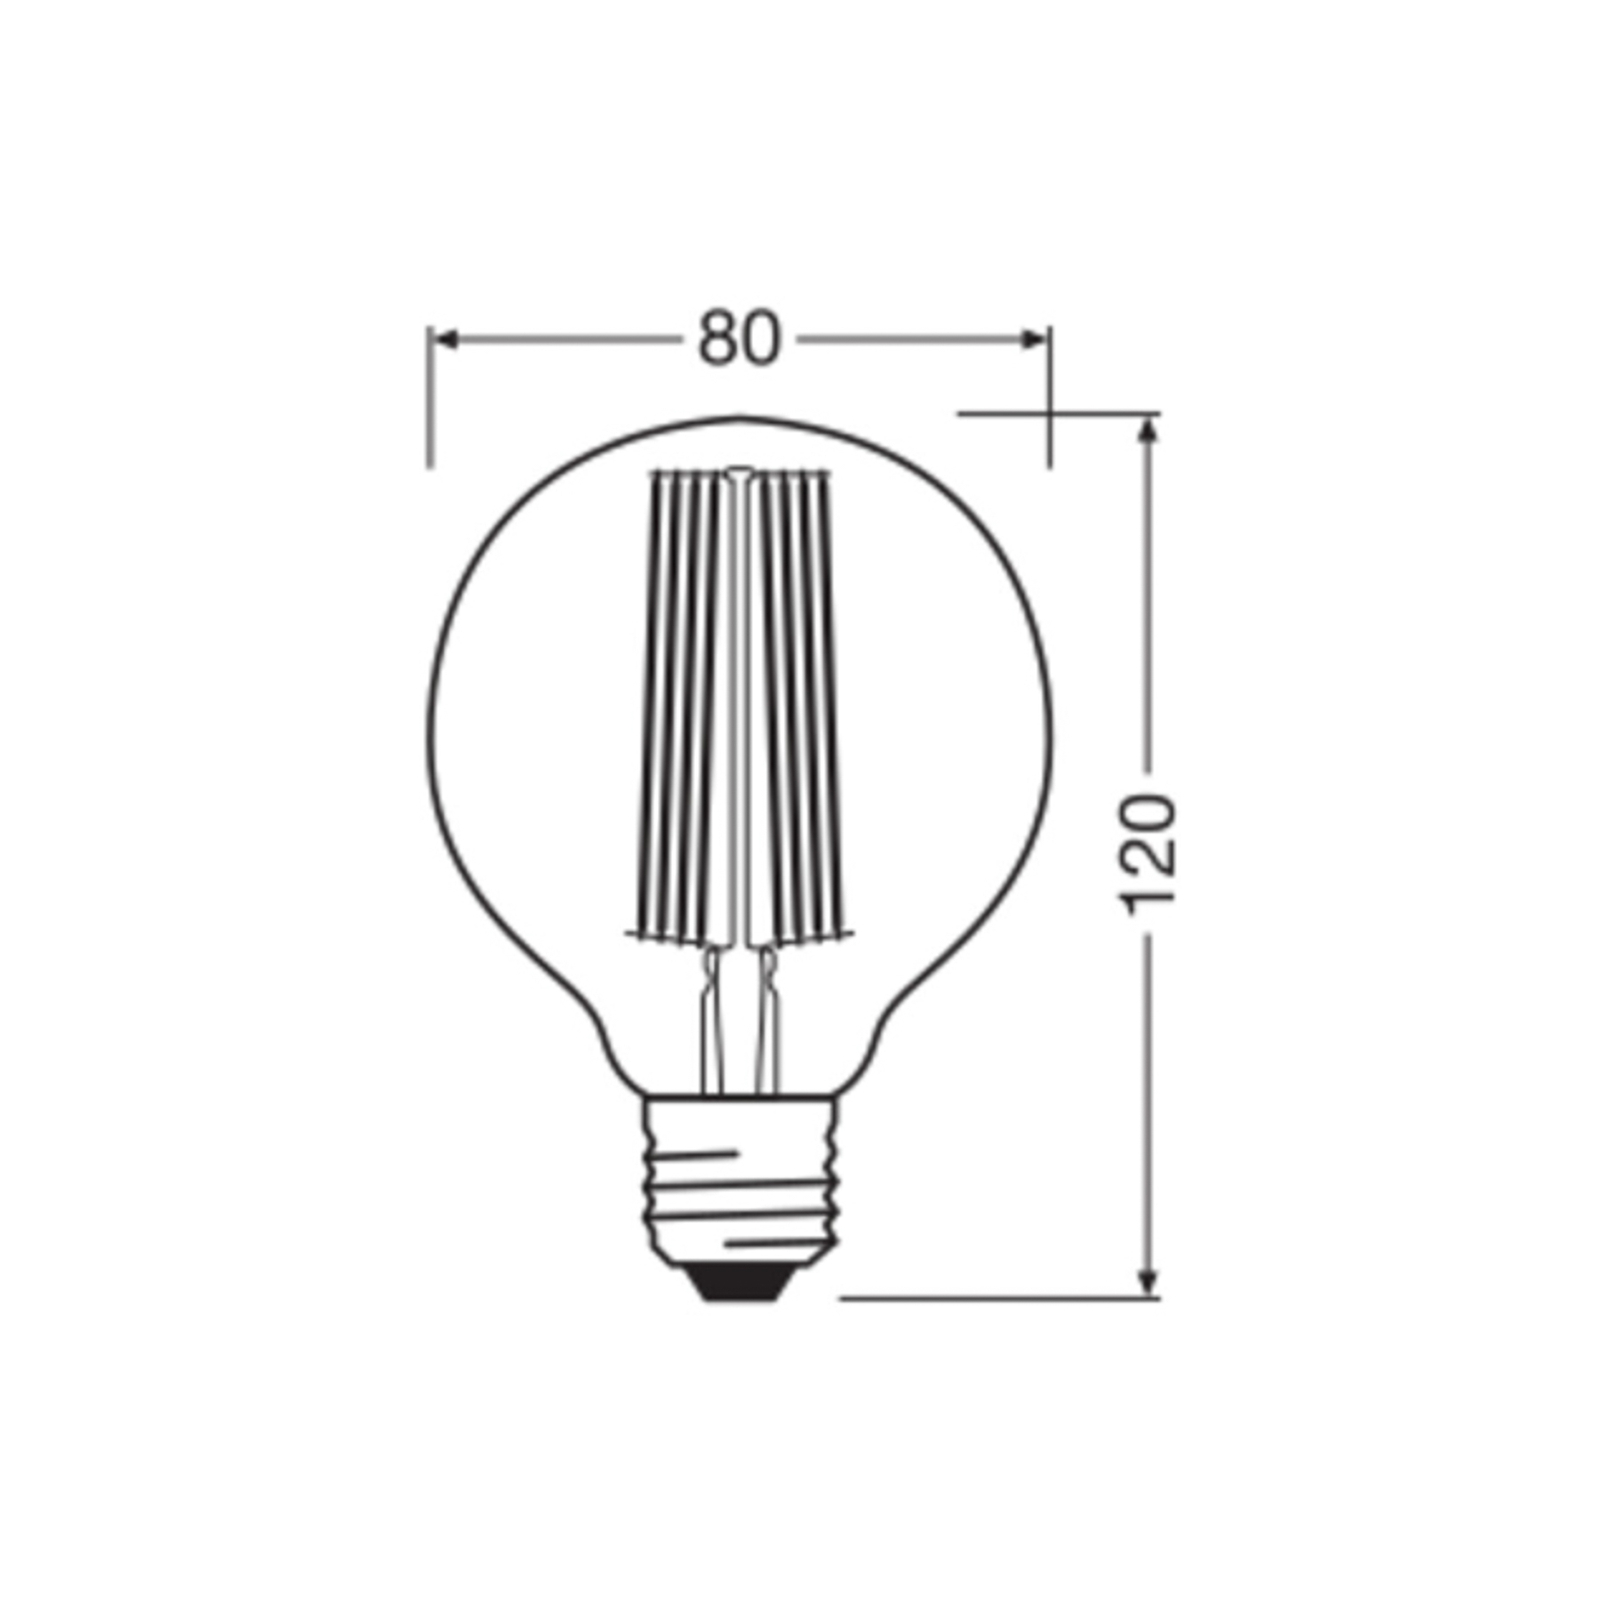 OSRAM LED Vintage 1906, G80, E27, 11 W, grey, 1,800 K, dimmable.